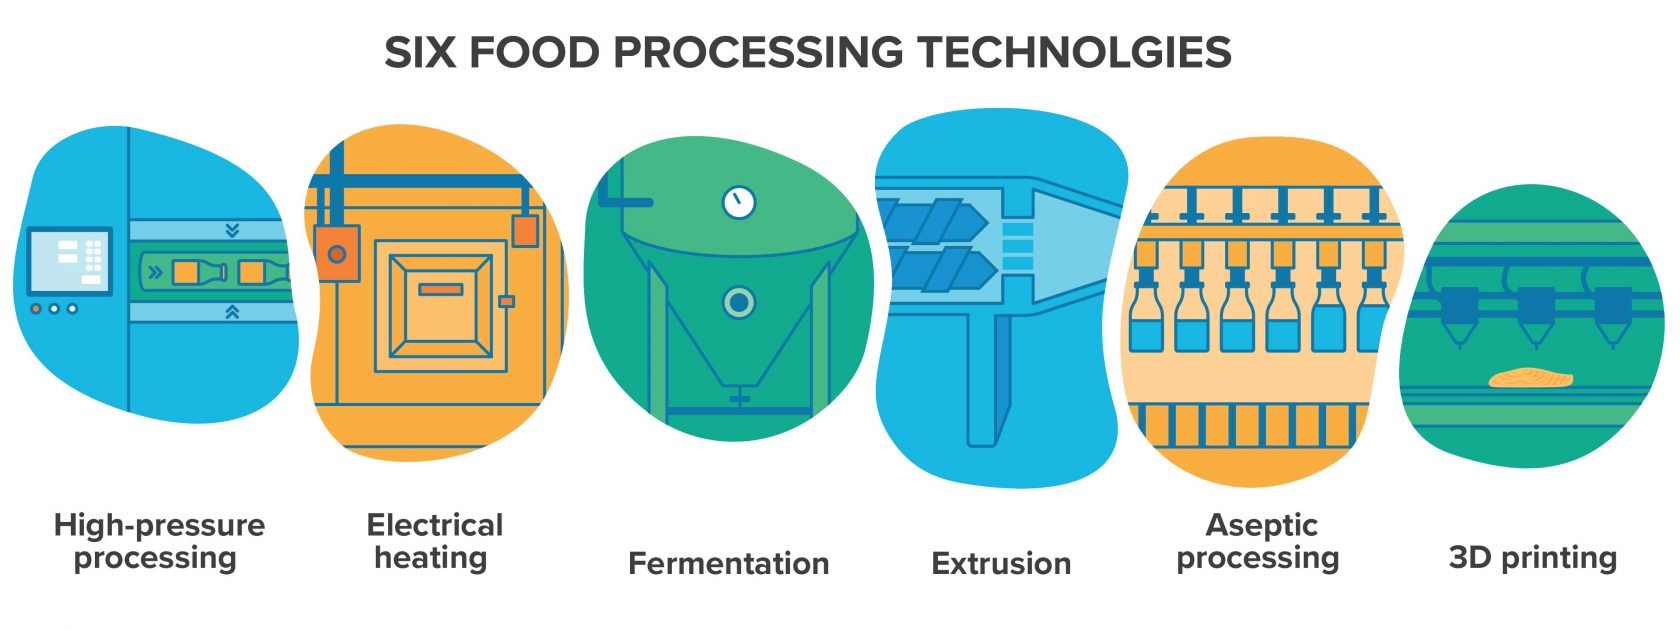 6 Food Processing Technologies_Overview